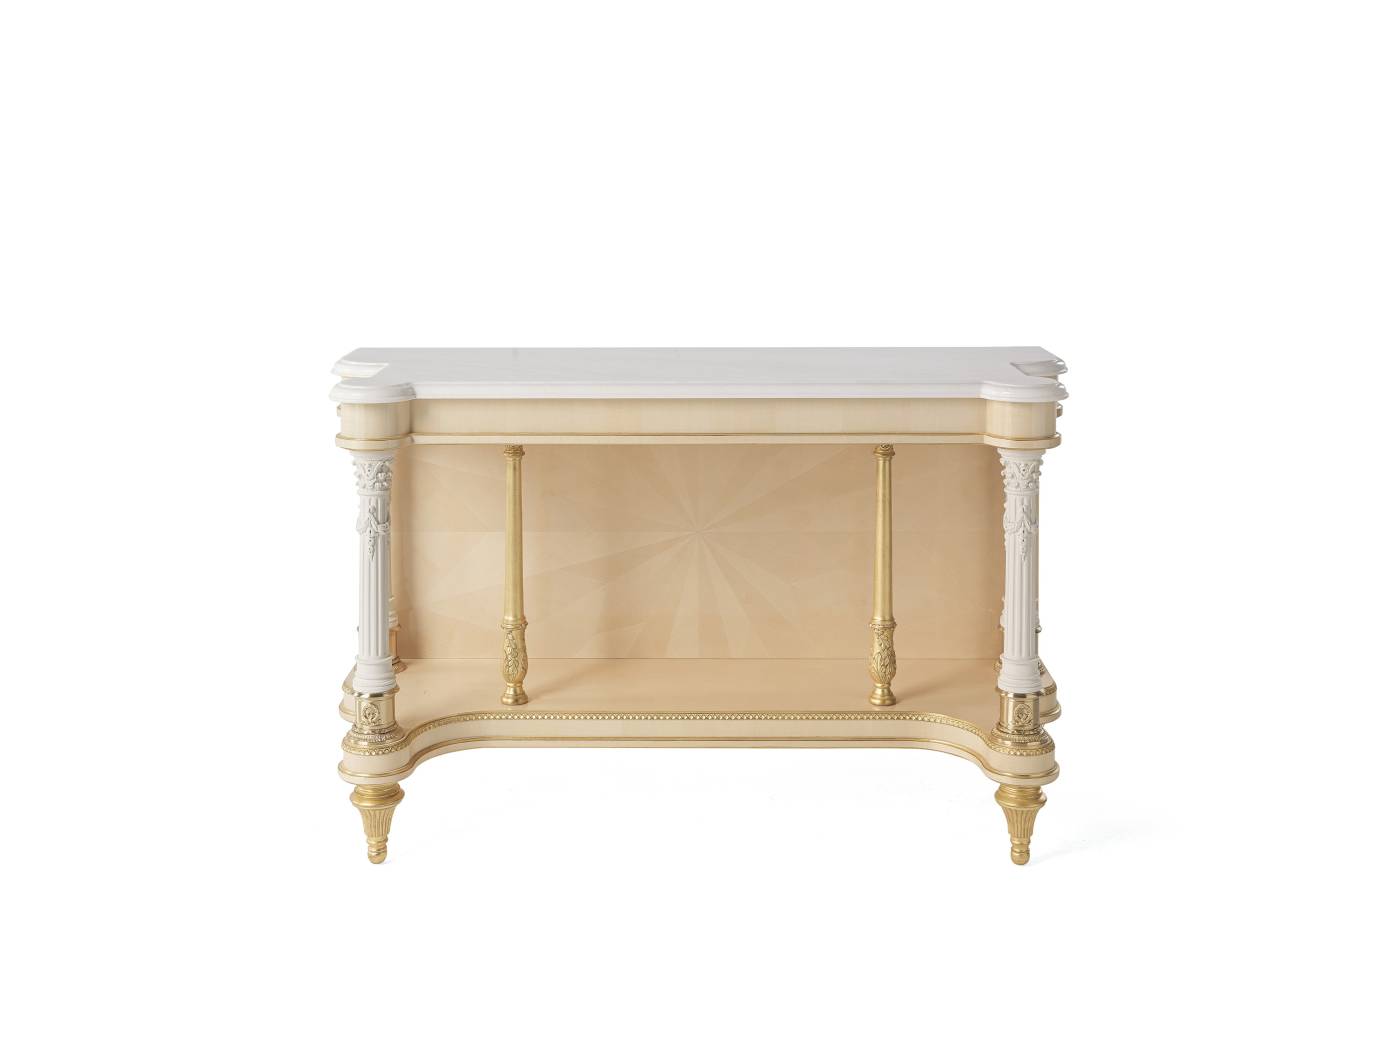 JumboCollection_Toulouse_Console_01.jpg